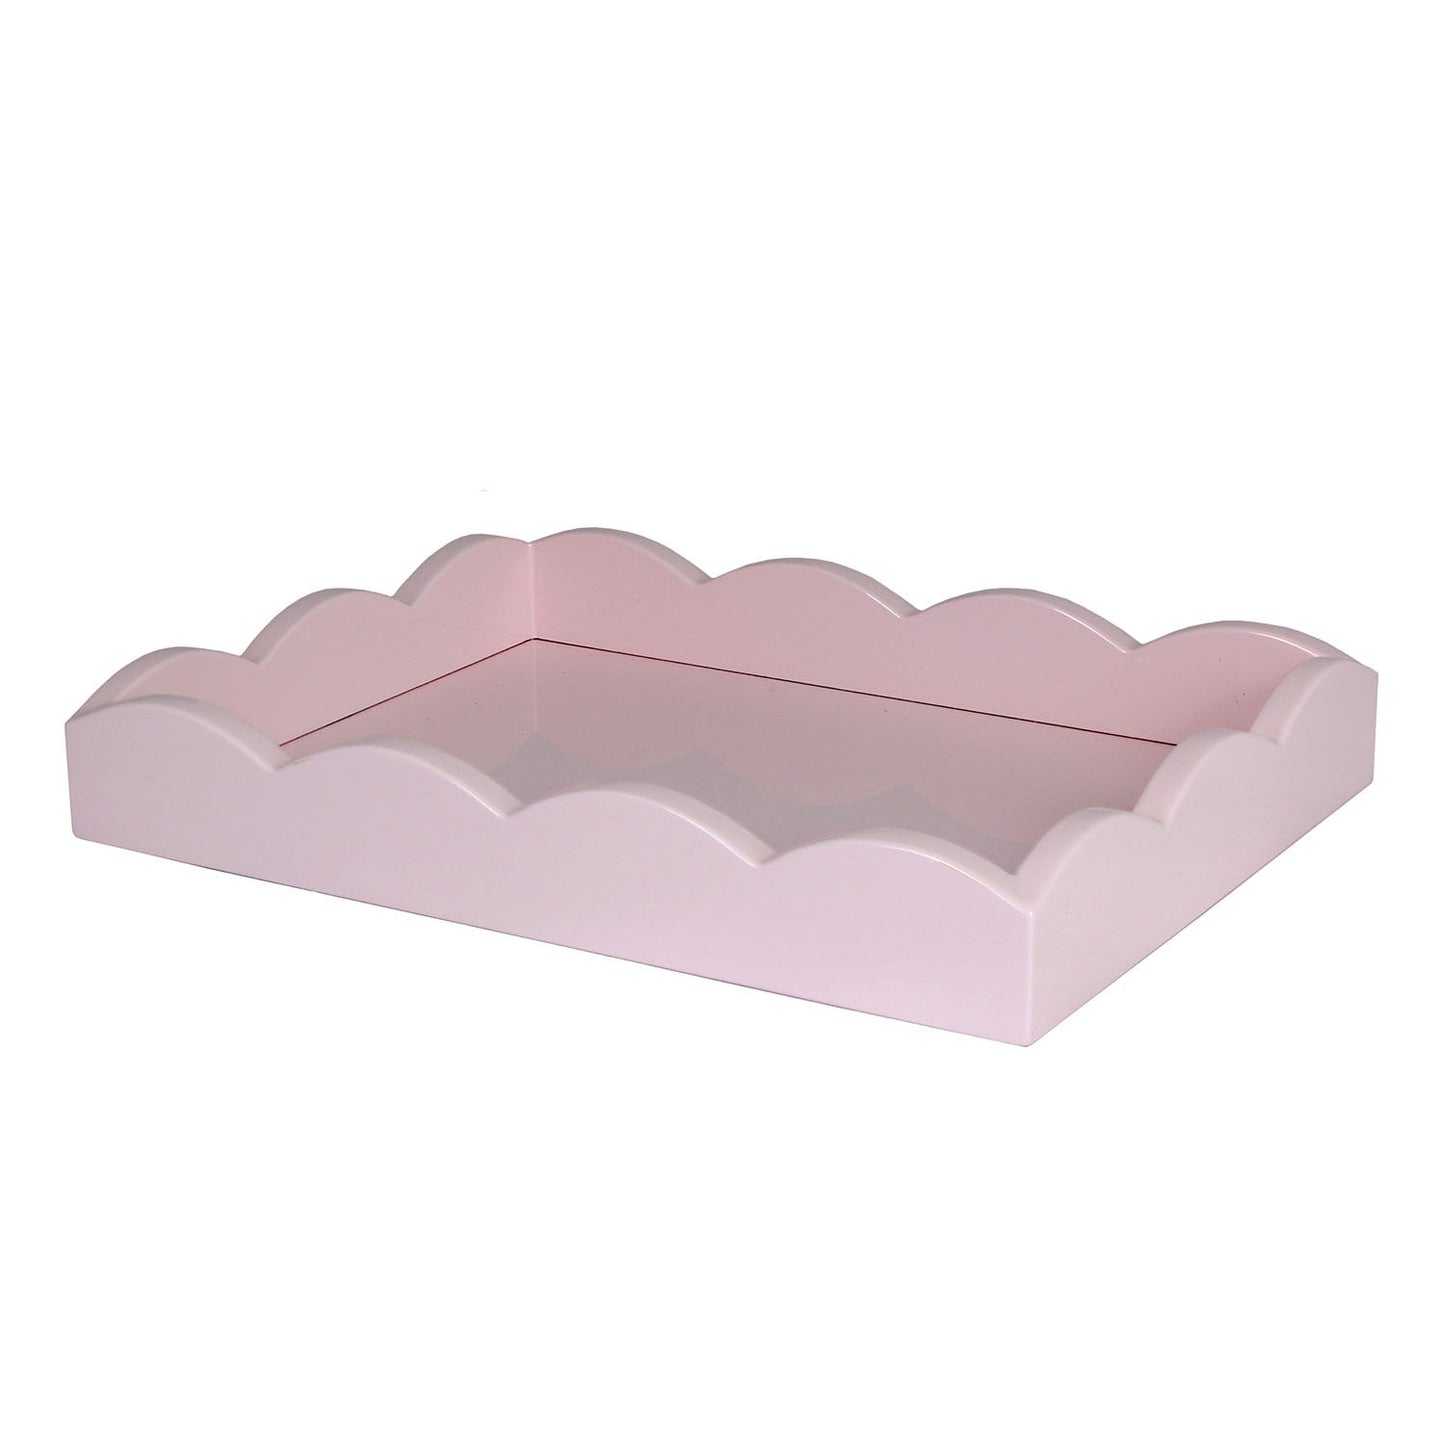 Pale Pink Small Lacquered Scalloped Tray - Addison Ross Ltd UK